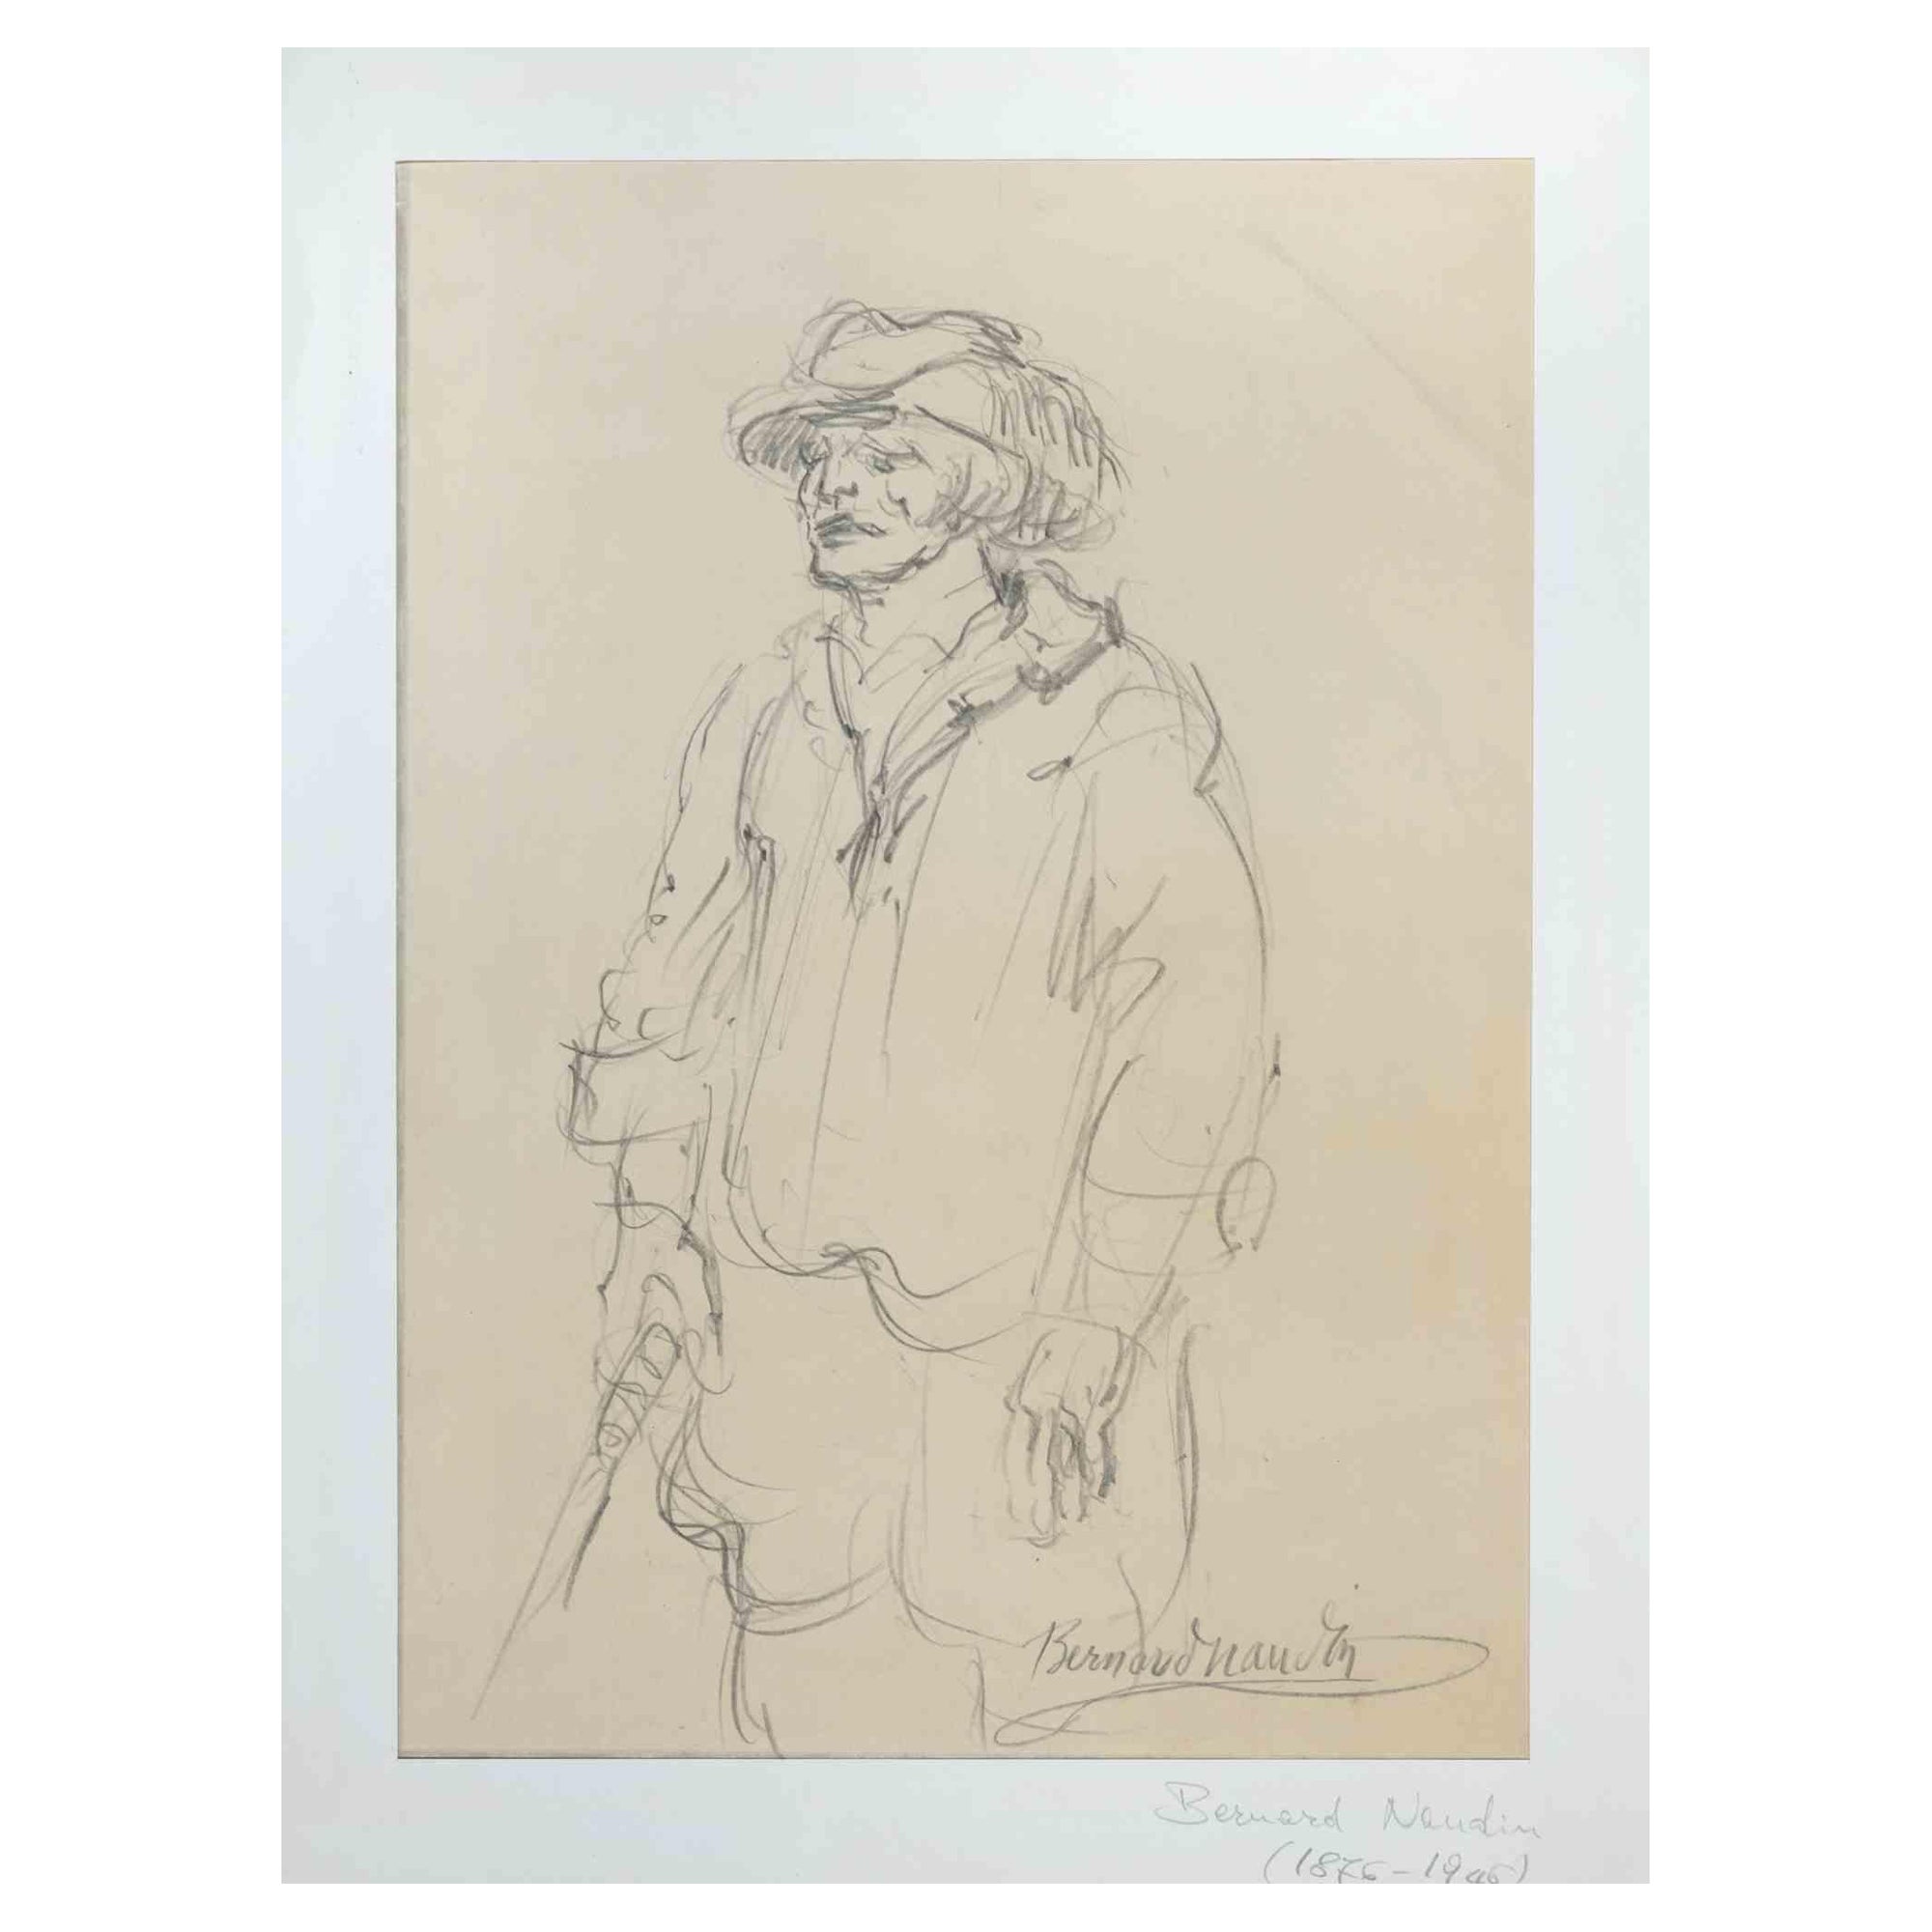 Hunter is an Original pencil drawing on paper realized by Bernard Naudin (1876-1946).

Hand-signed on the lower.

The artwork is in good condition on creamy-colored paper, included a white cardboard Passepartout.

Bernard Étienne Hubert Naudin (11